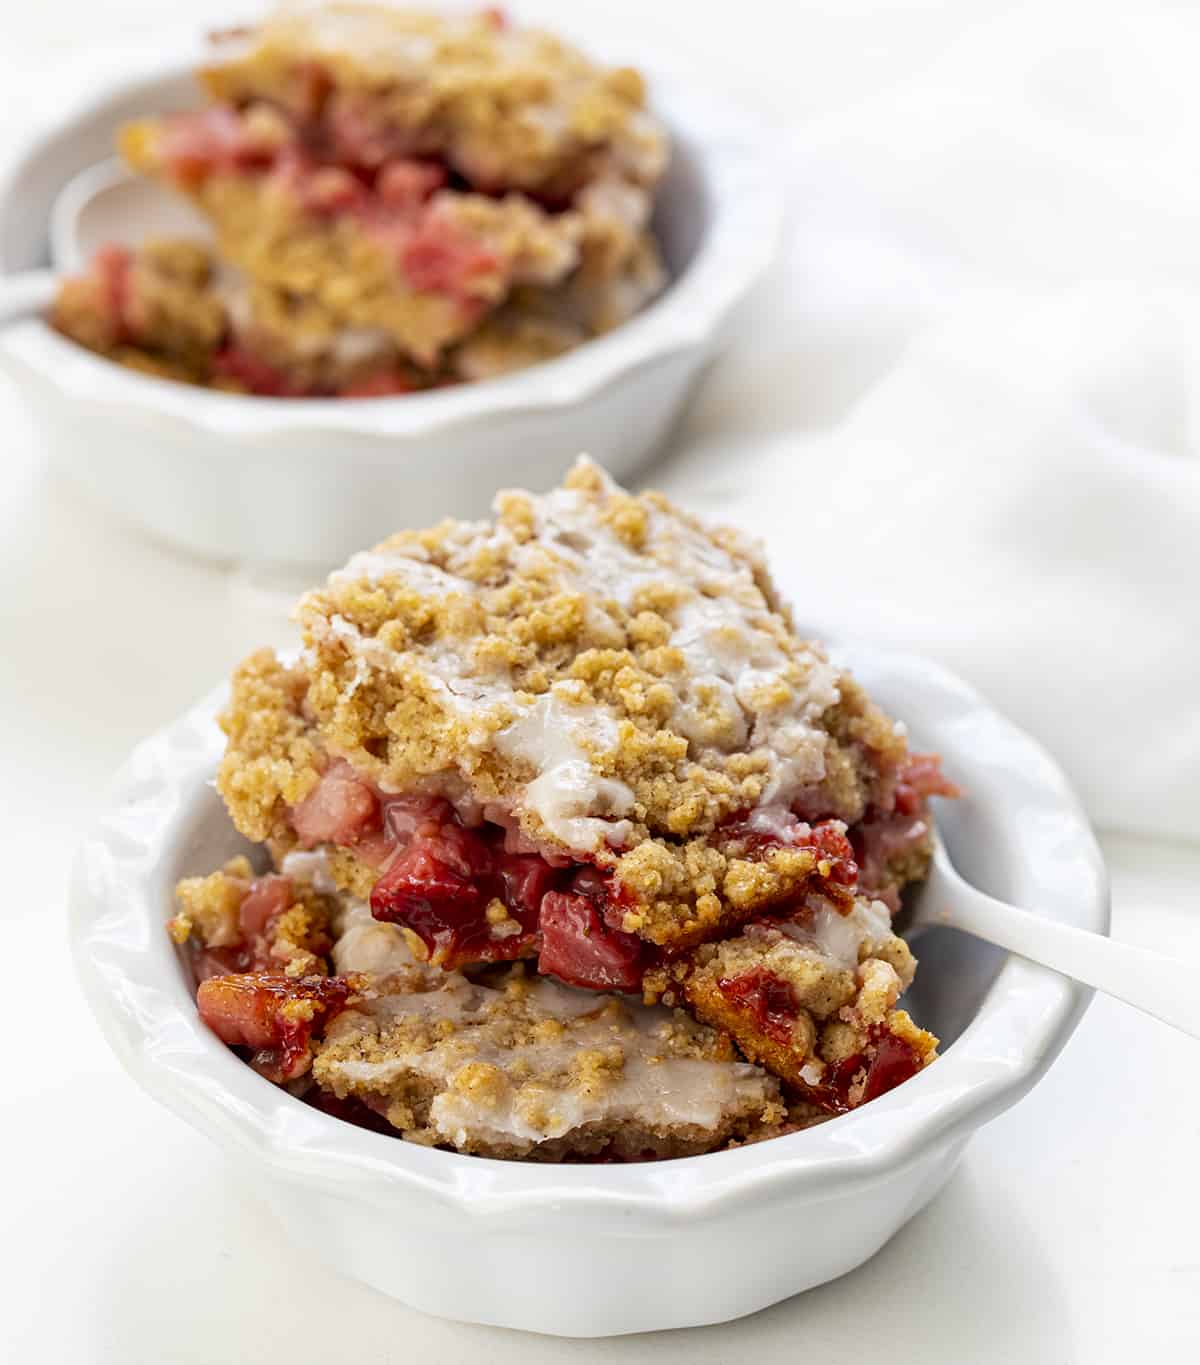 Bowls of Skillet Strawberry Crumble